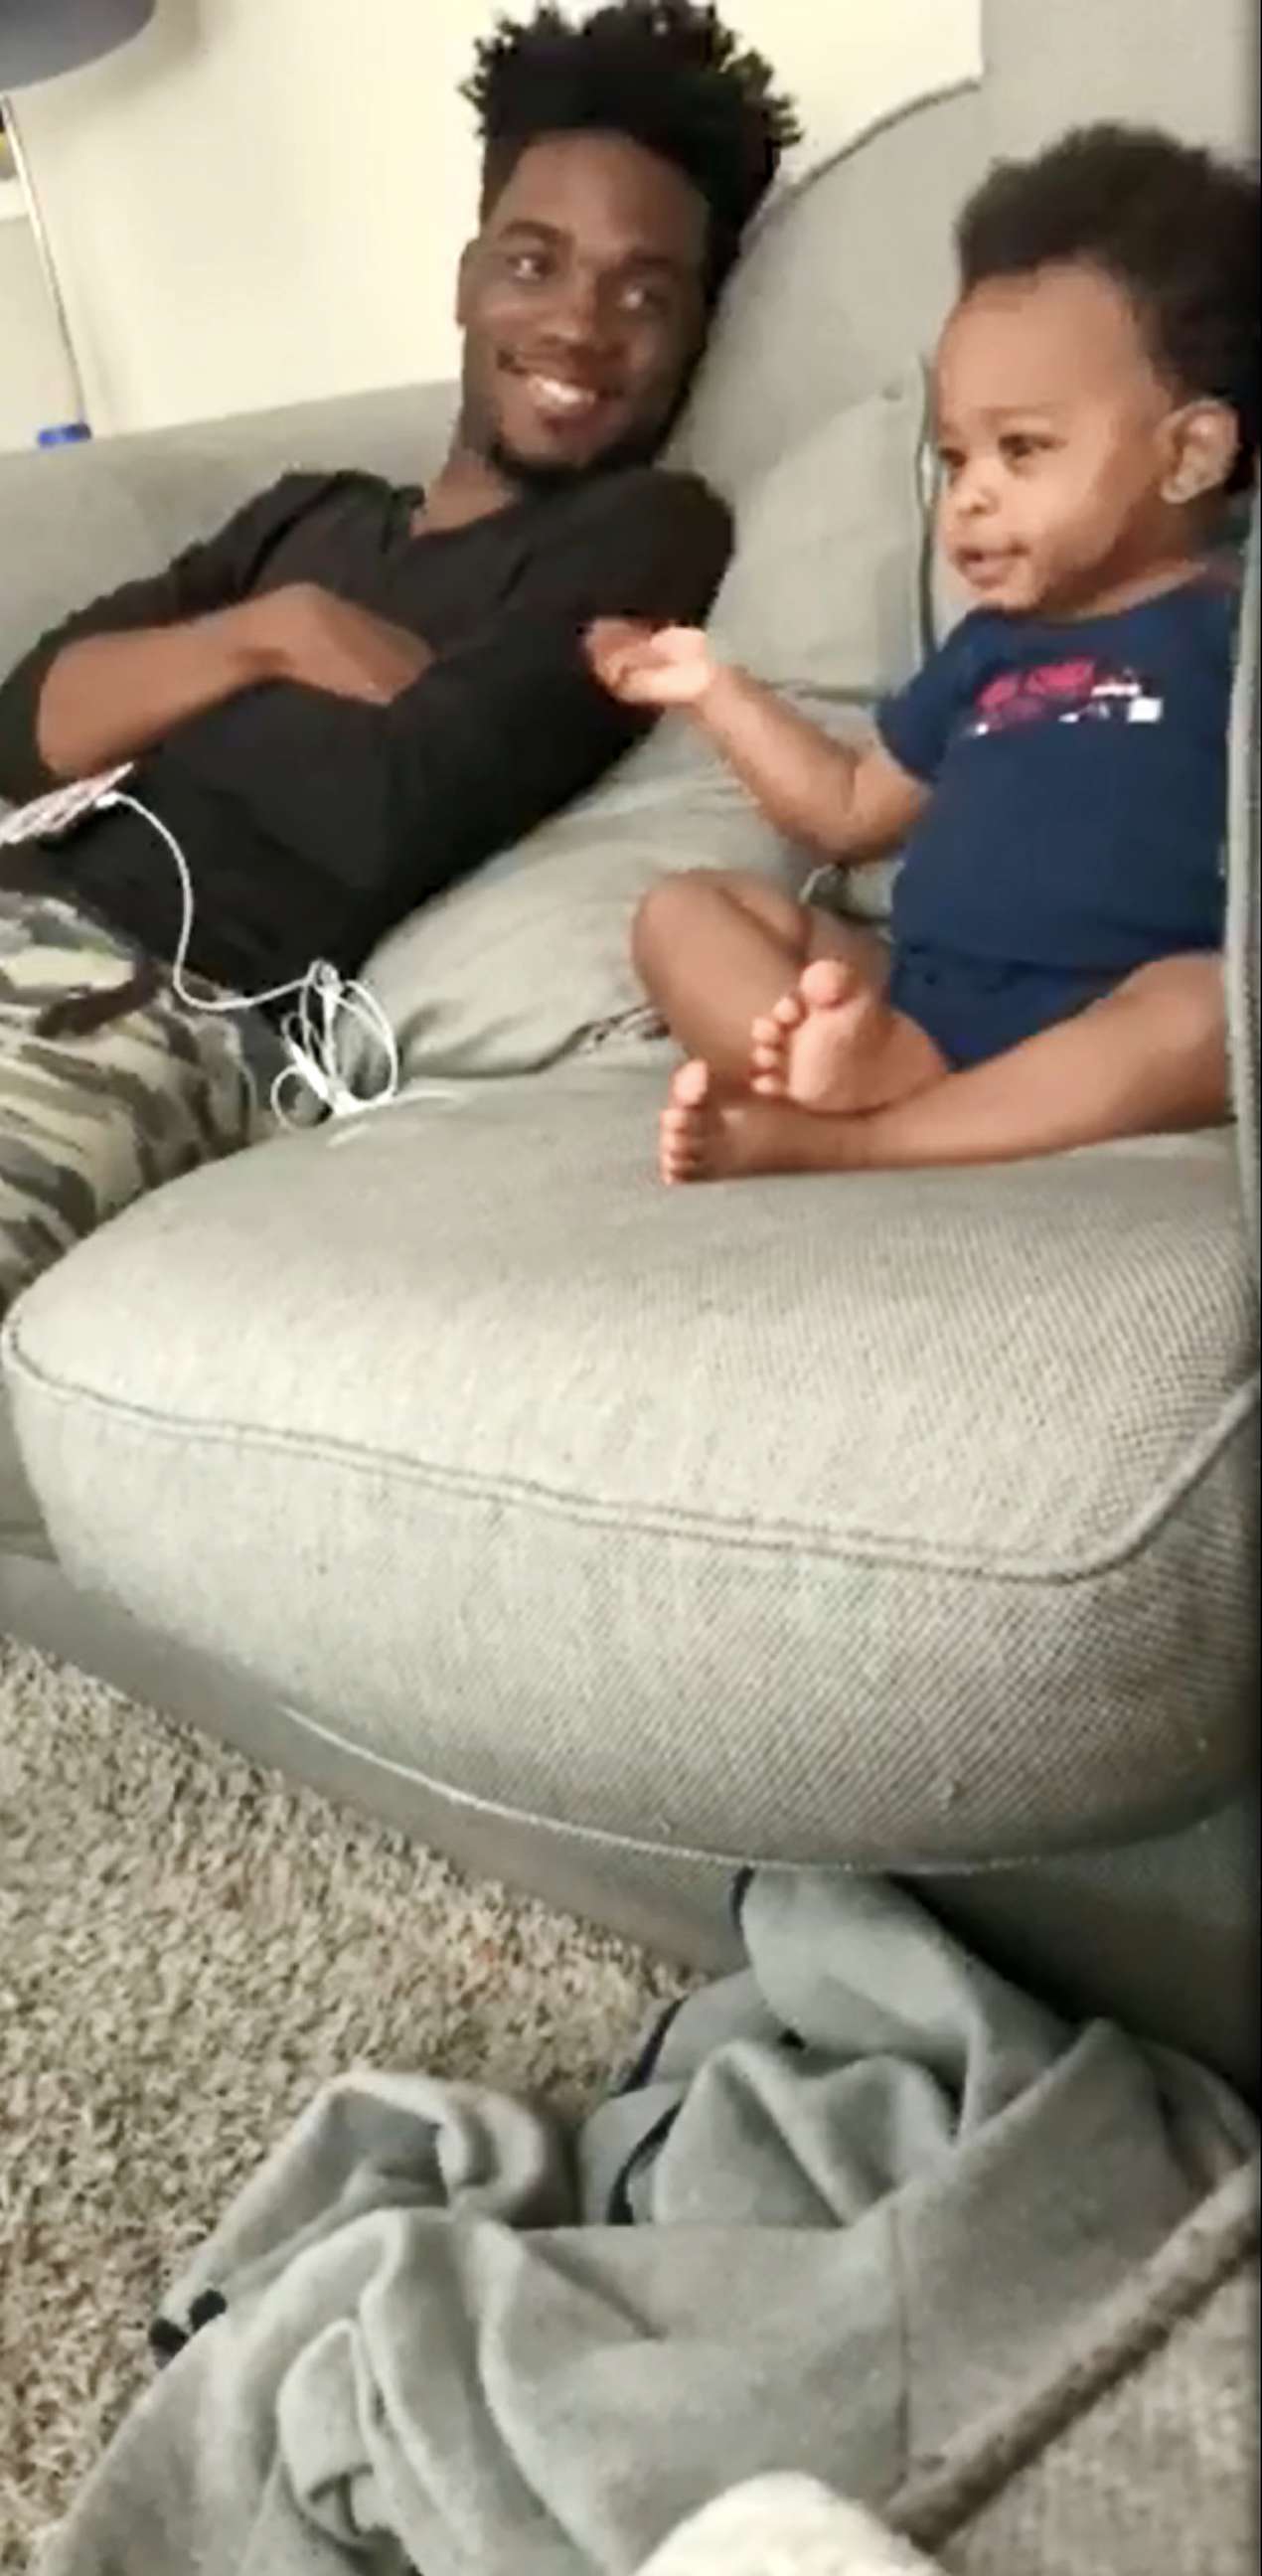 PHOTO: Shanieke Pryor shared footage of her son Kingston and dad DJ Pryor sitting on the couch while watching TV and engaging in hilarious conversation on June 4, 2019.